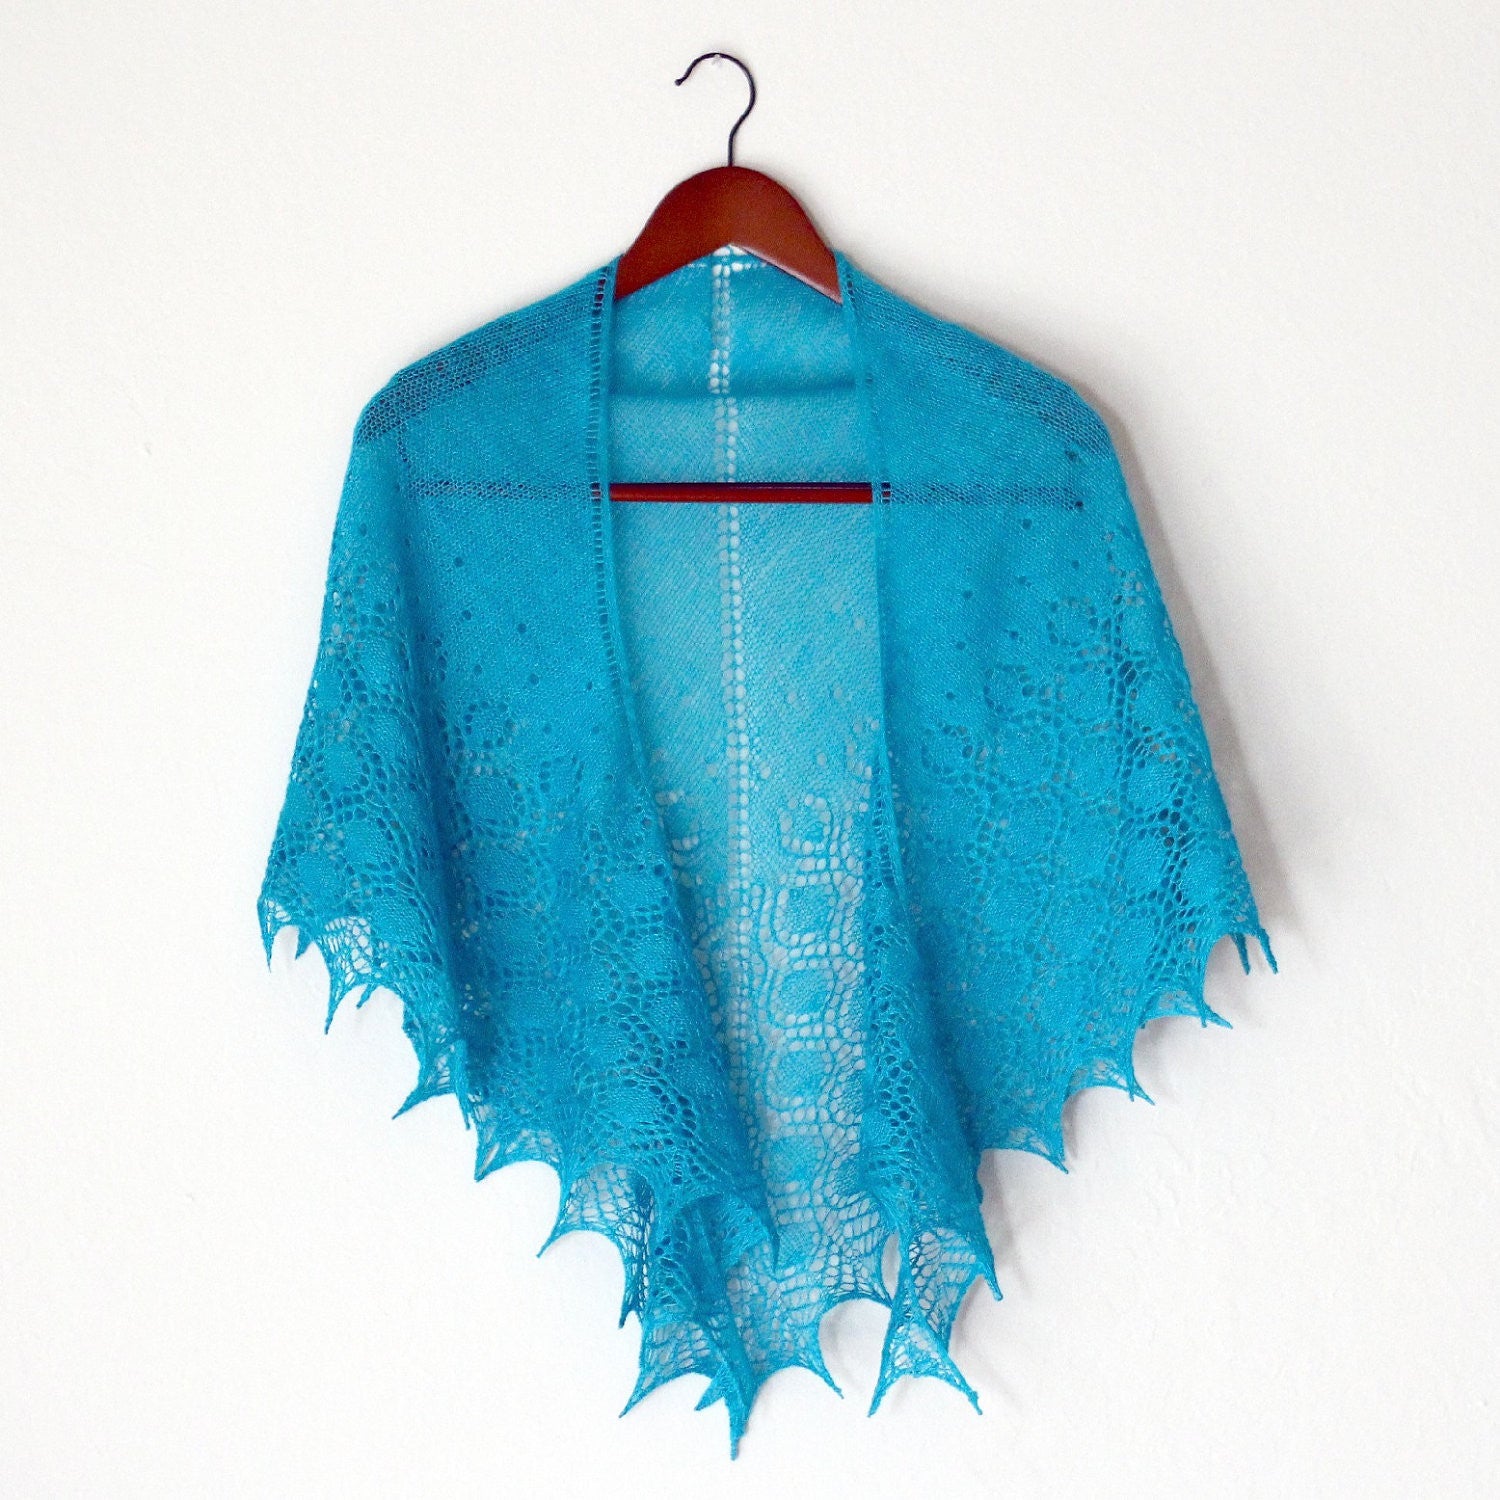 Knit shawl in turquoise color, lace shawl, gift for her (25 colors available)